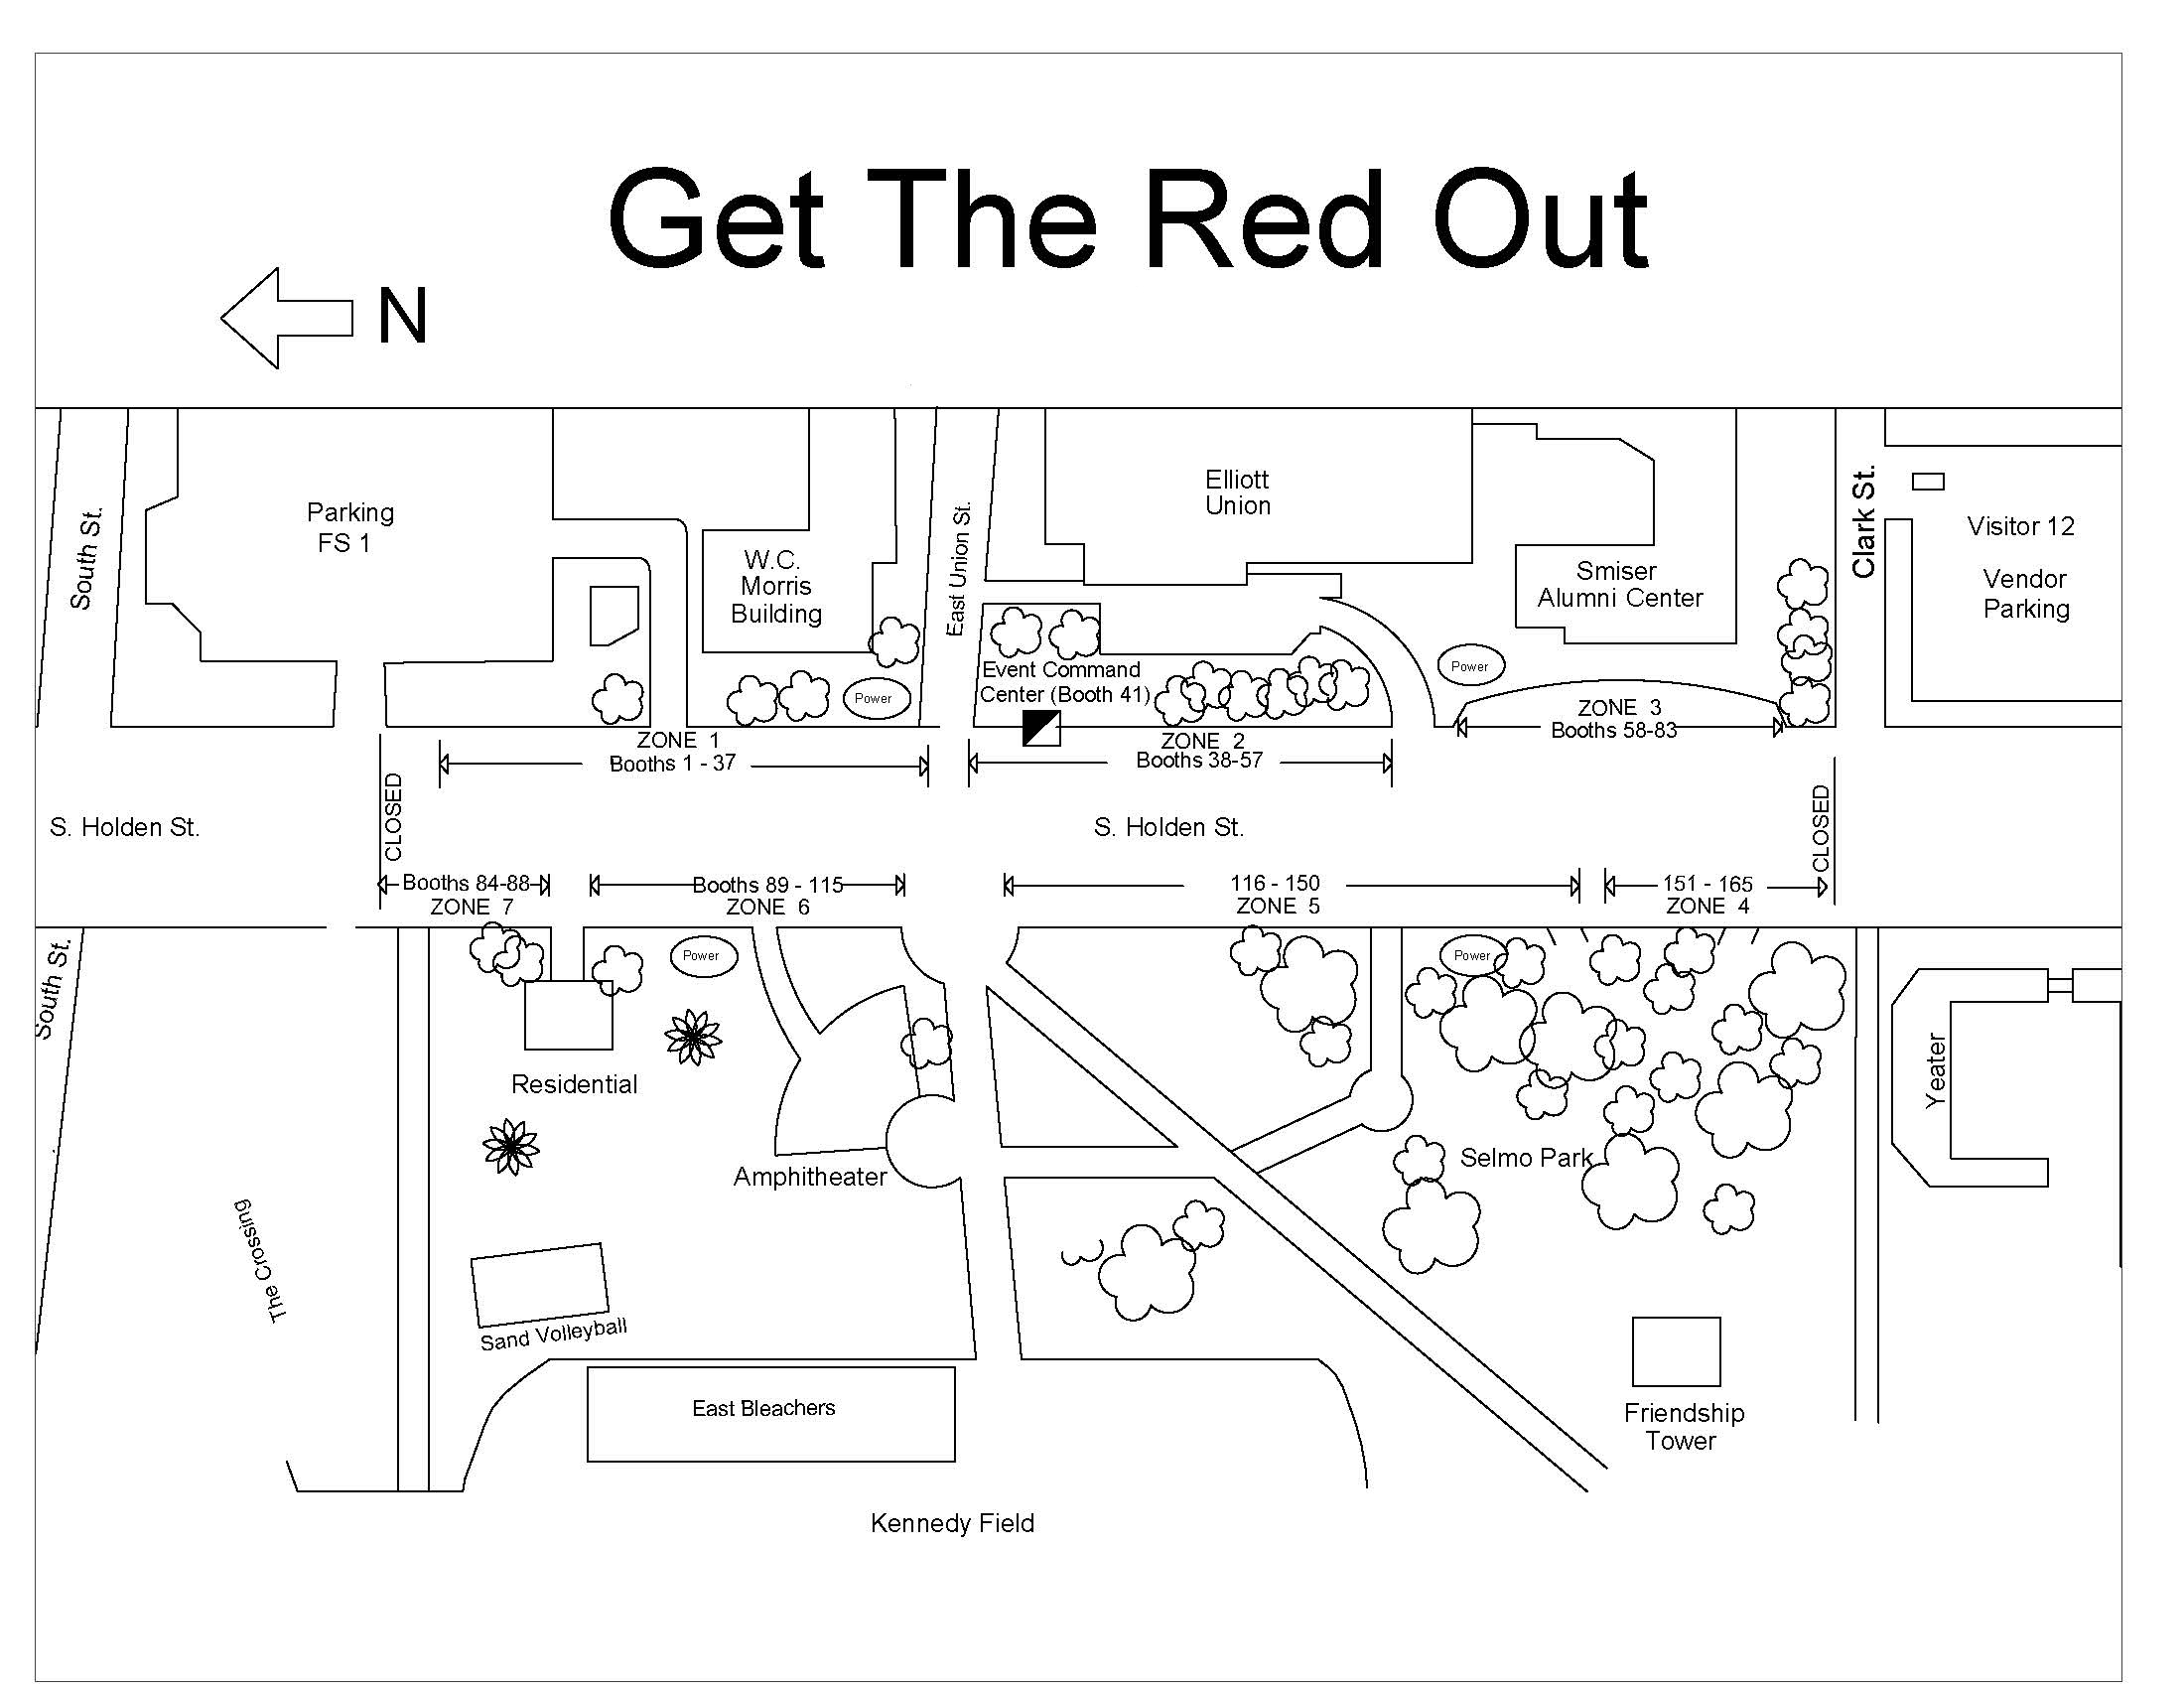 Get the Red Out @ UCM